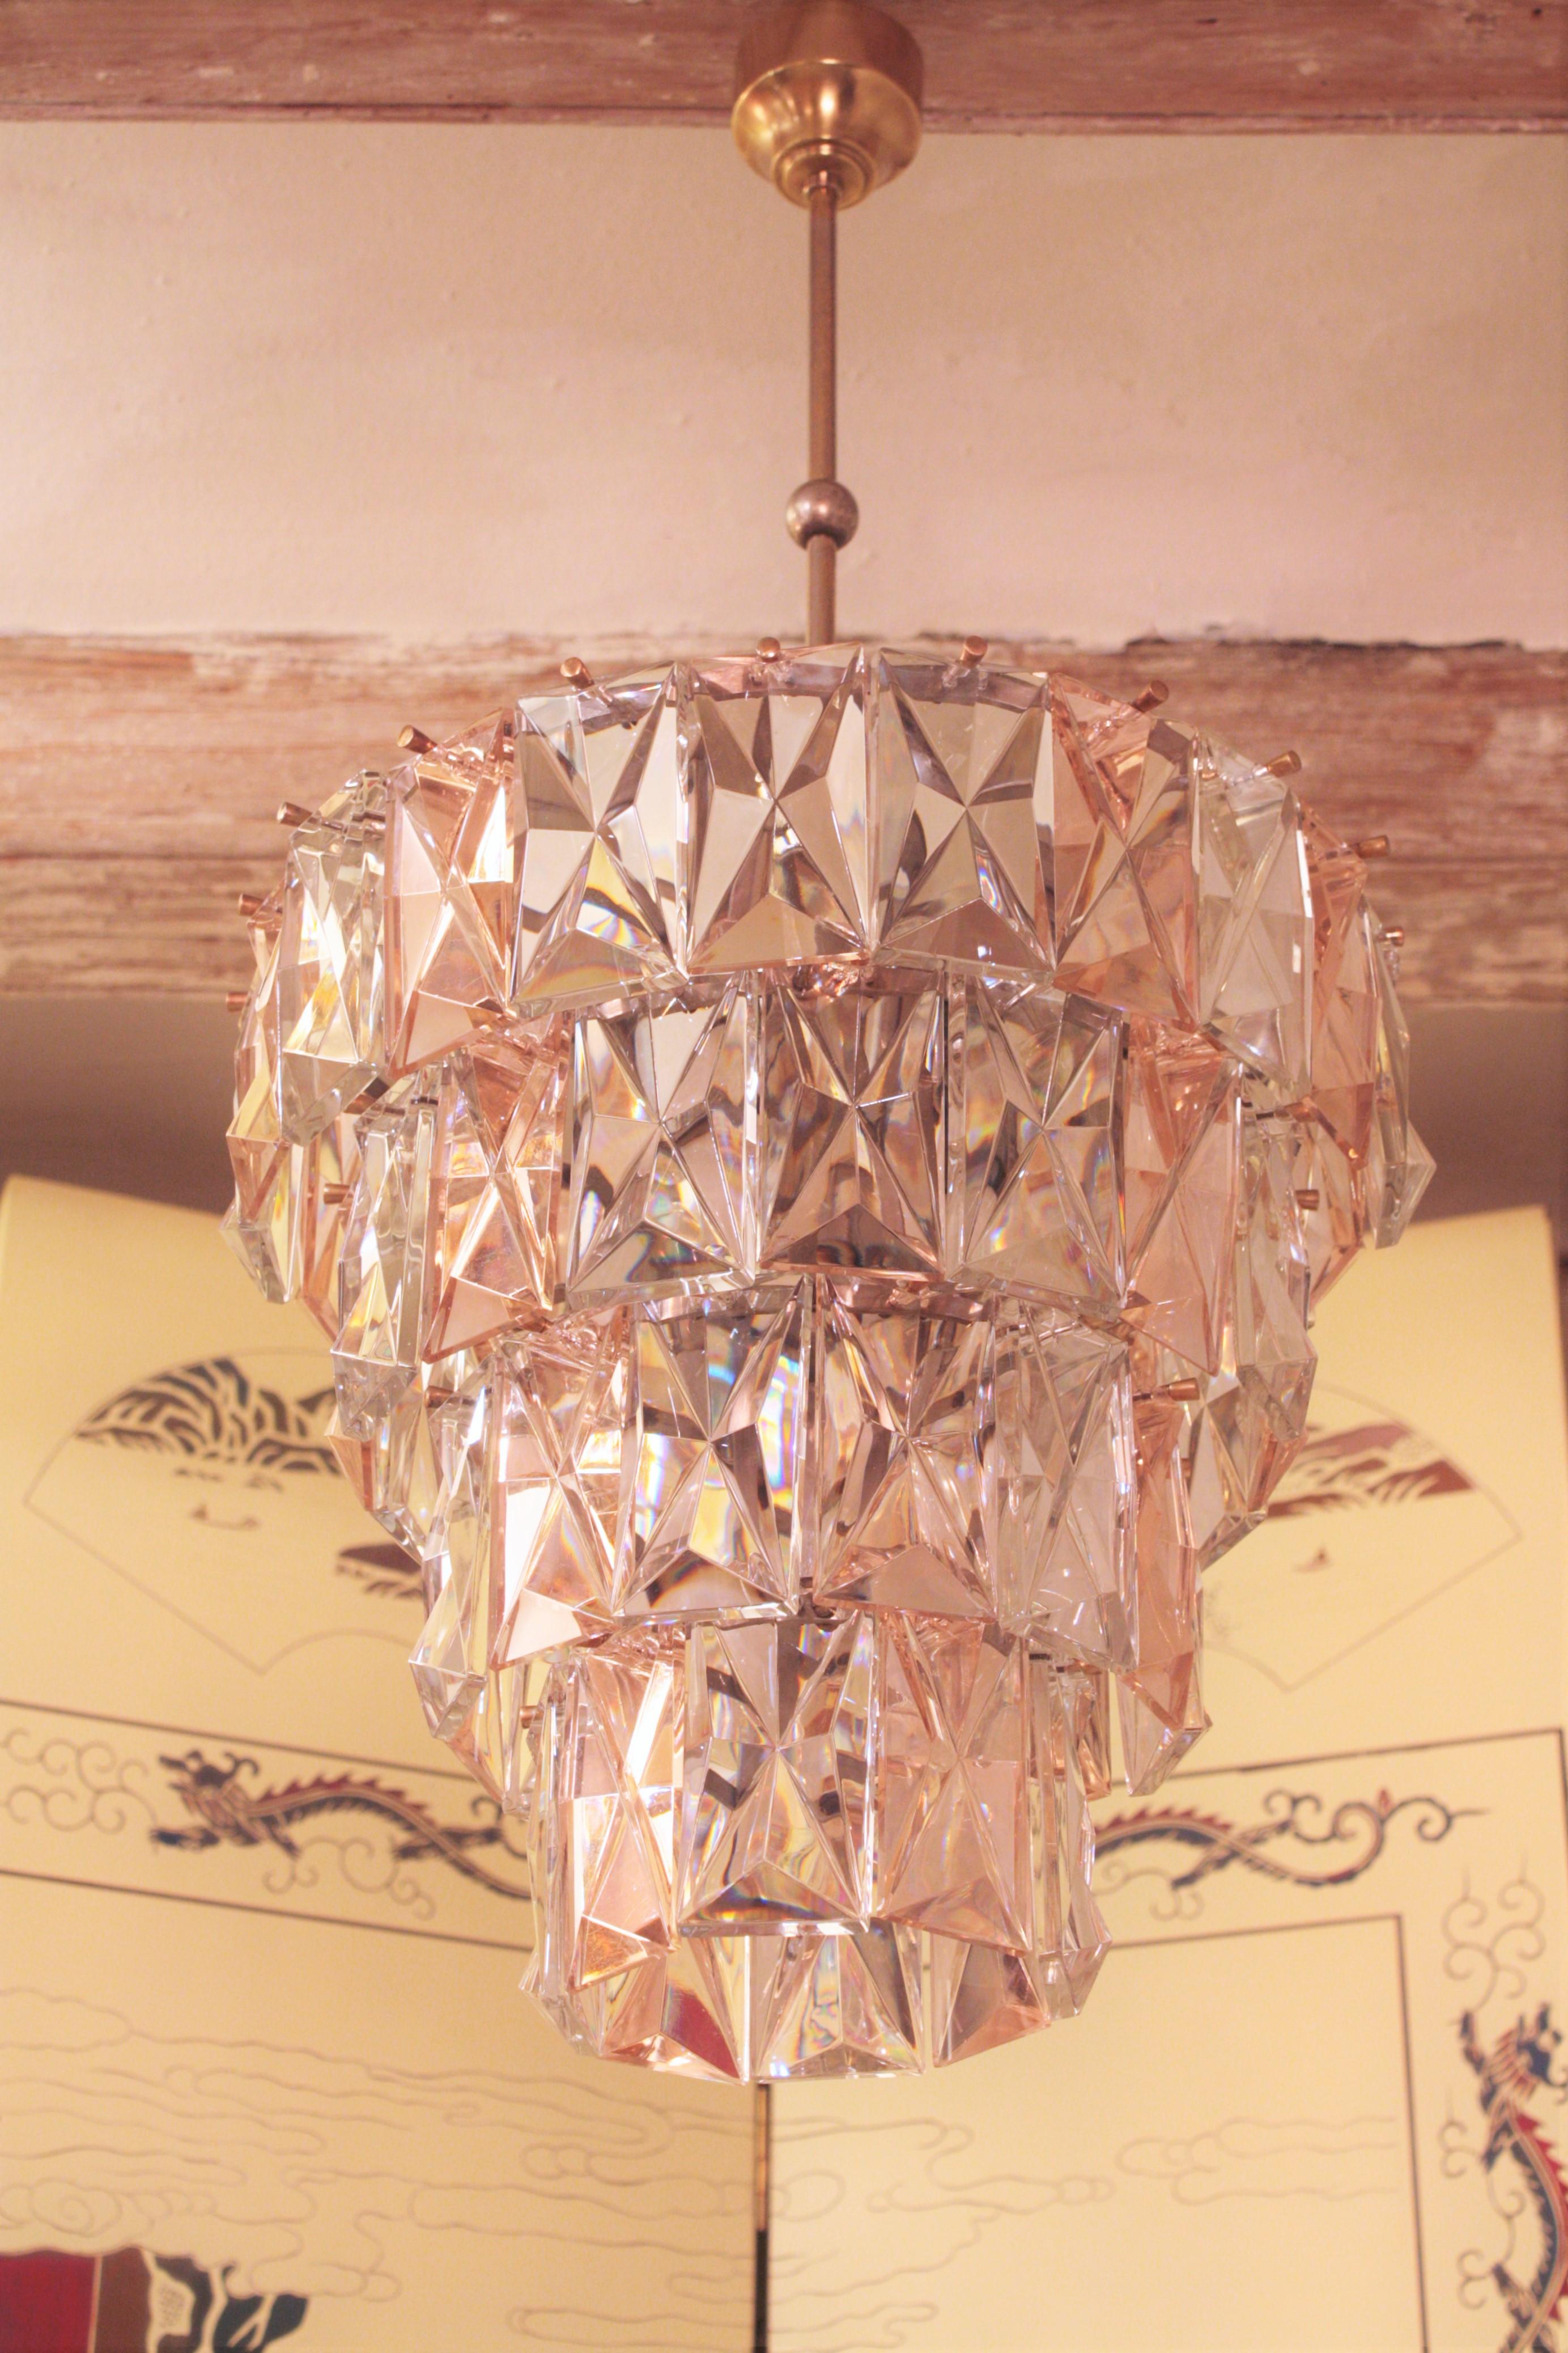 Polished Midcentury Kinkeldey Chandelier in Pink and Clear Faceted Crystal, 1960s For Sale